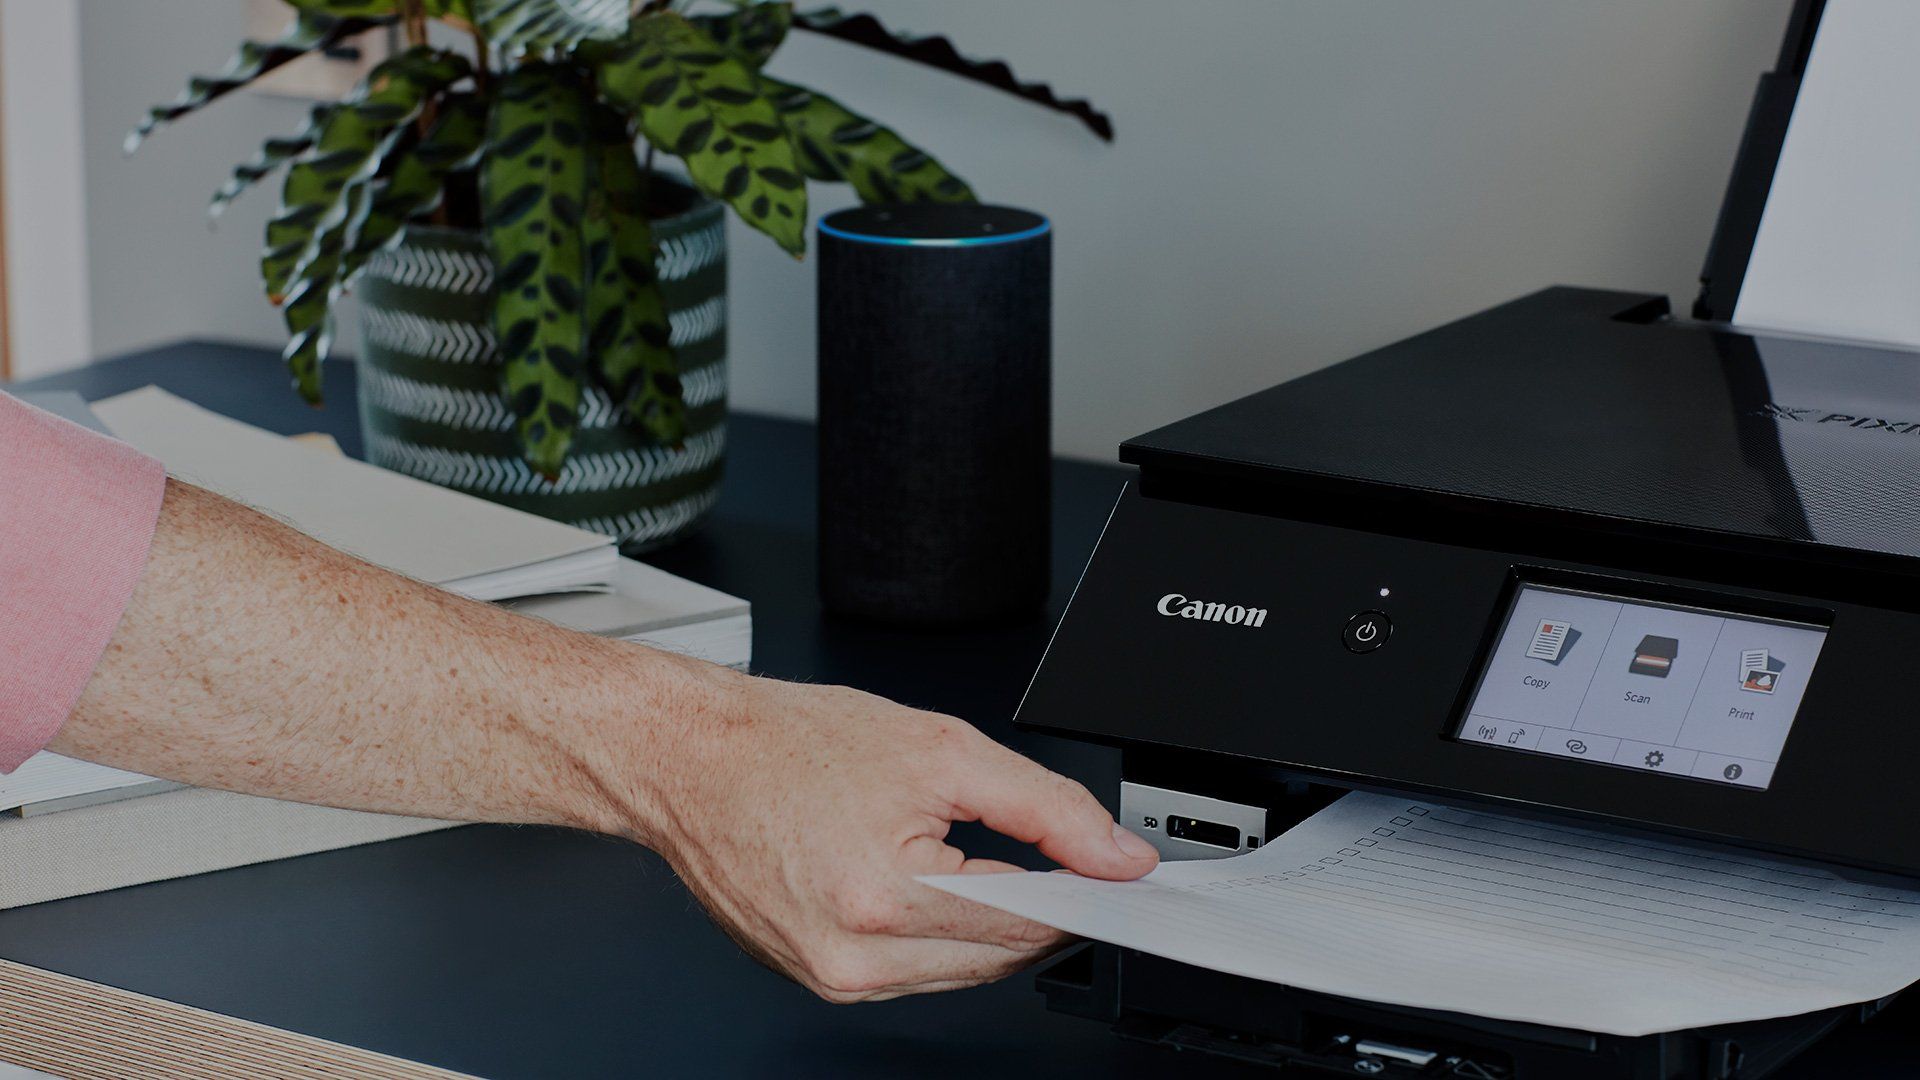 A user takes hold of a printout as it emerges from a black Canon PIXMA TS8250 printer, which sits on a tabletop with an Amazon Echo smart speaker next to it.